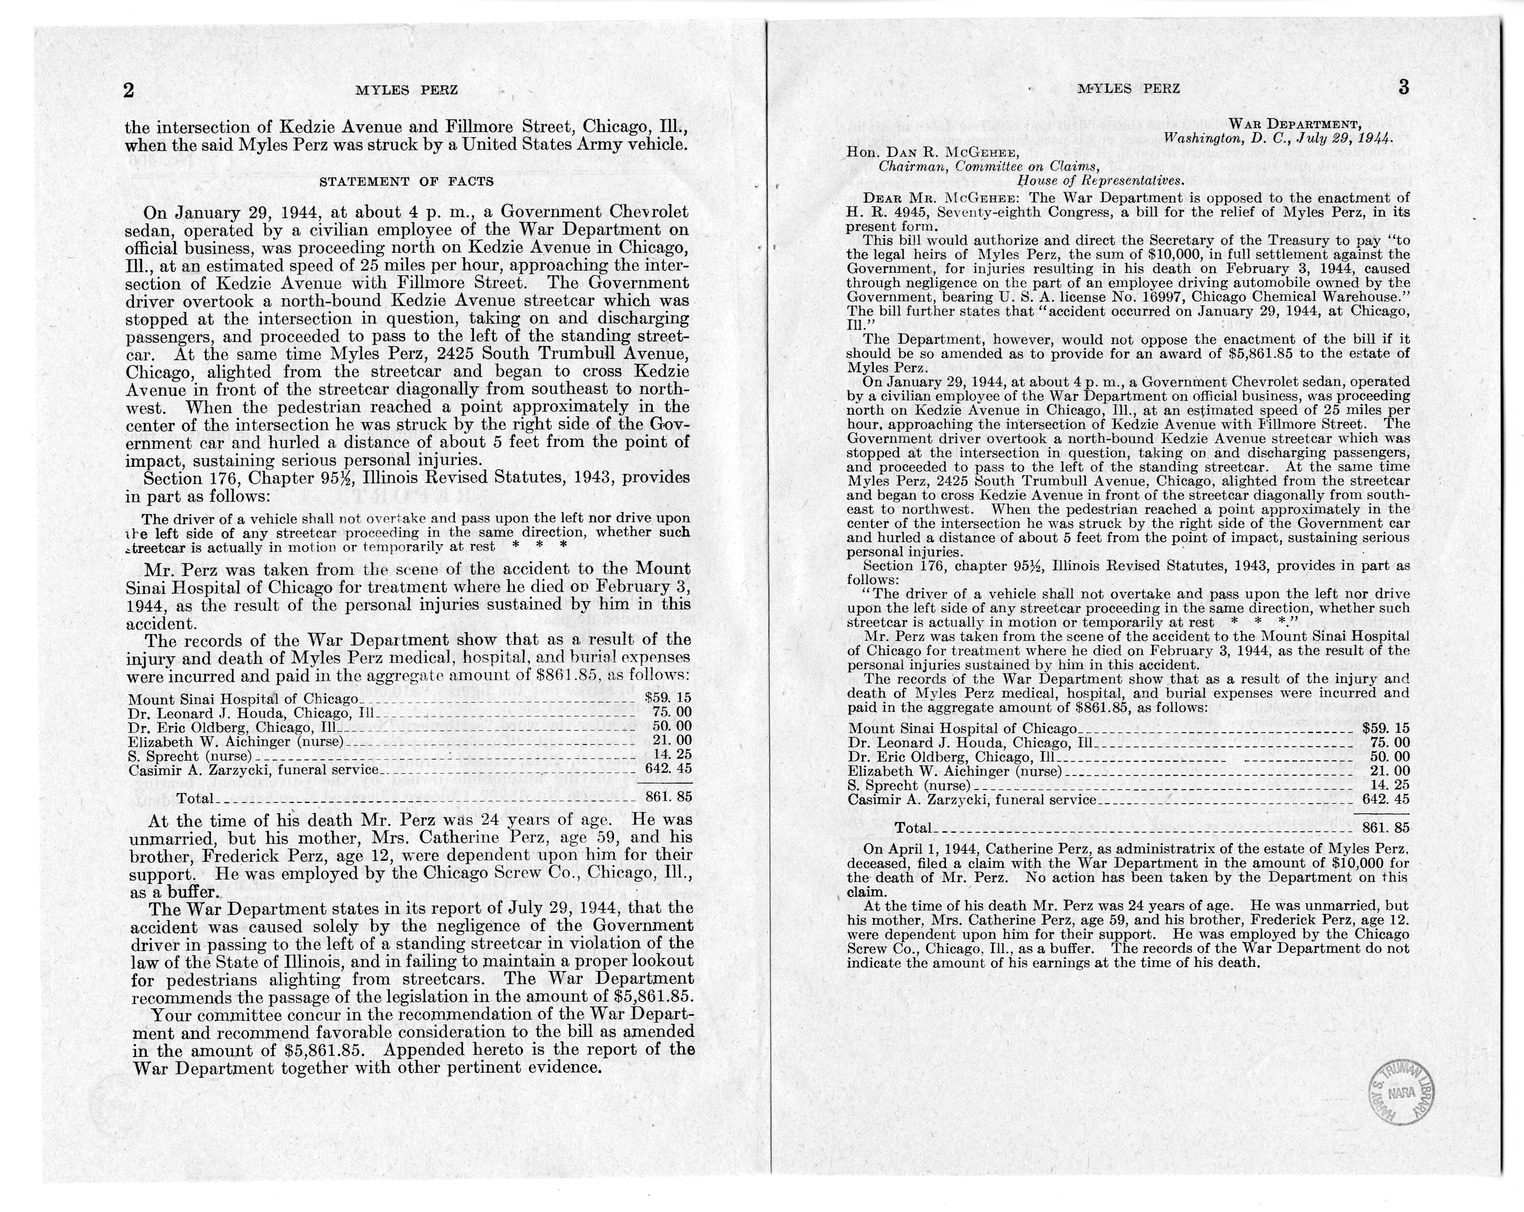 Memorandum from Frederick J. Bailey to M. C. Latta, H.R. 903, for the Relief of the Estate of Myles Perz, with Attachments